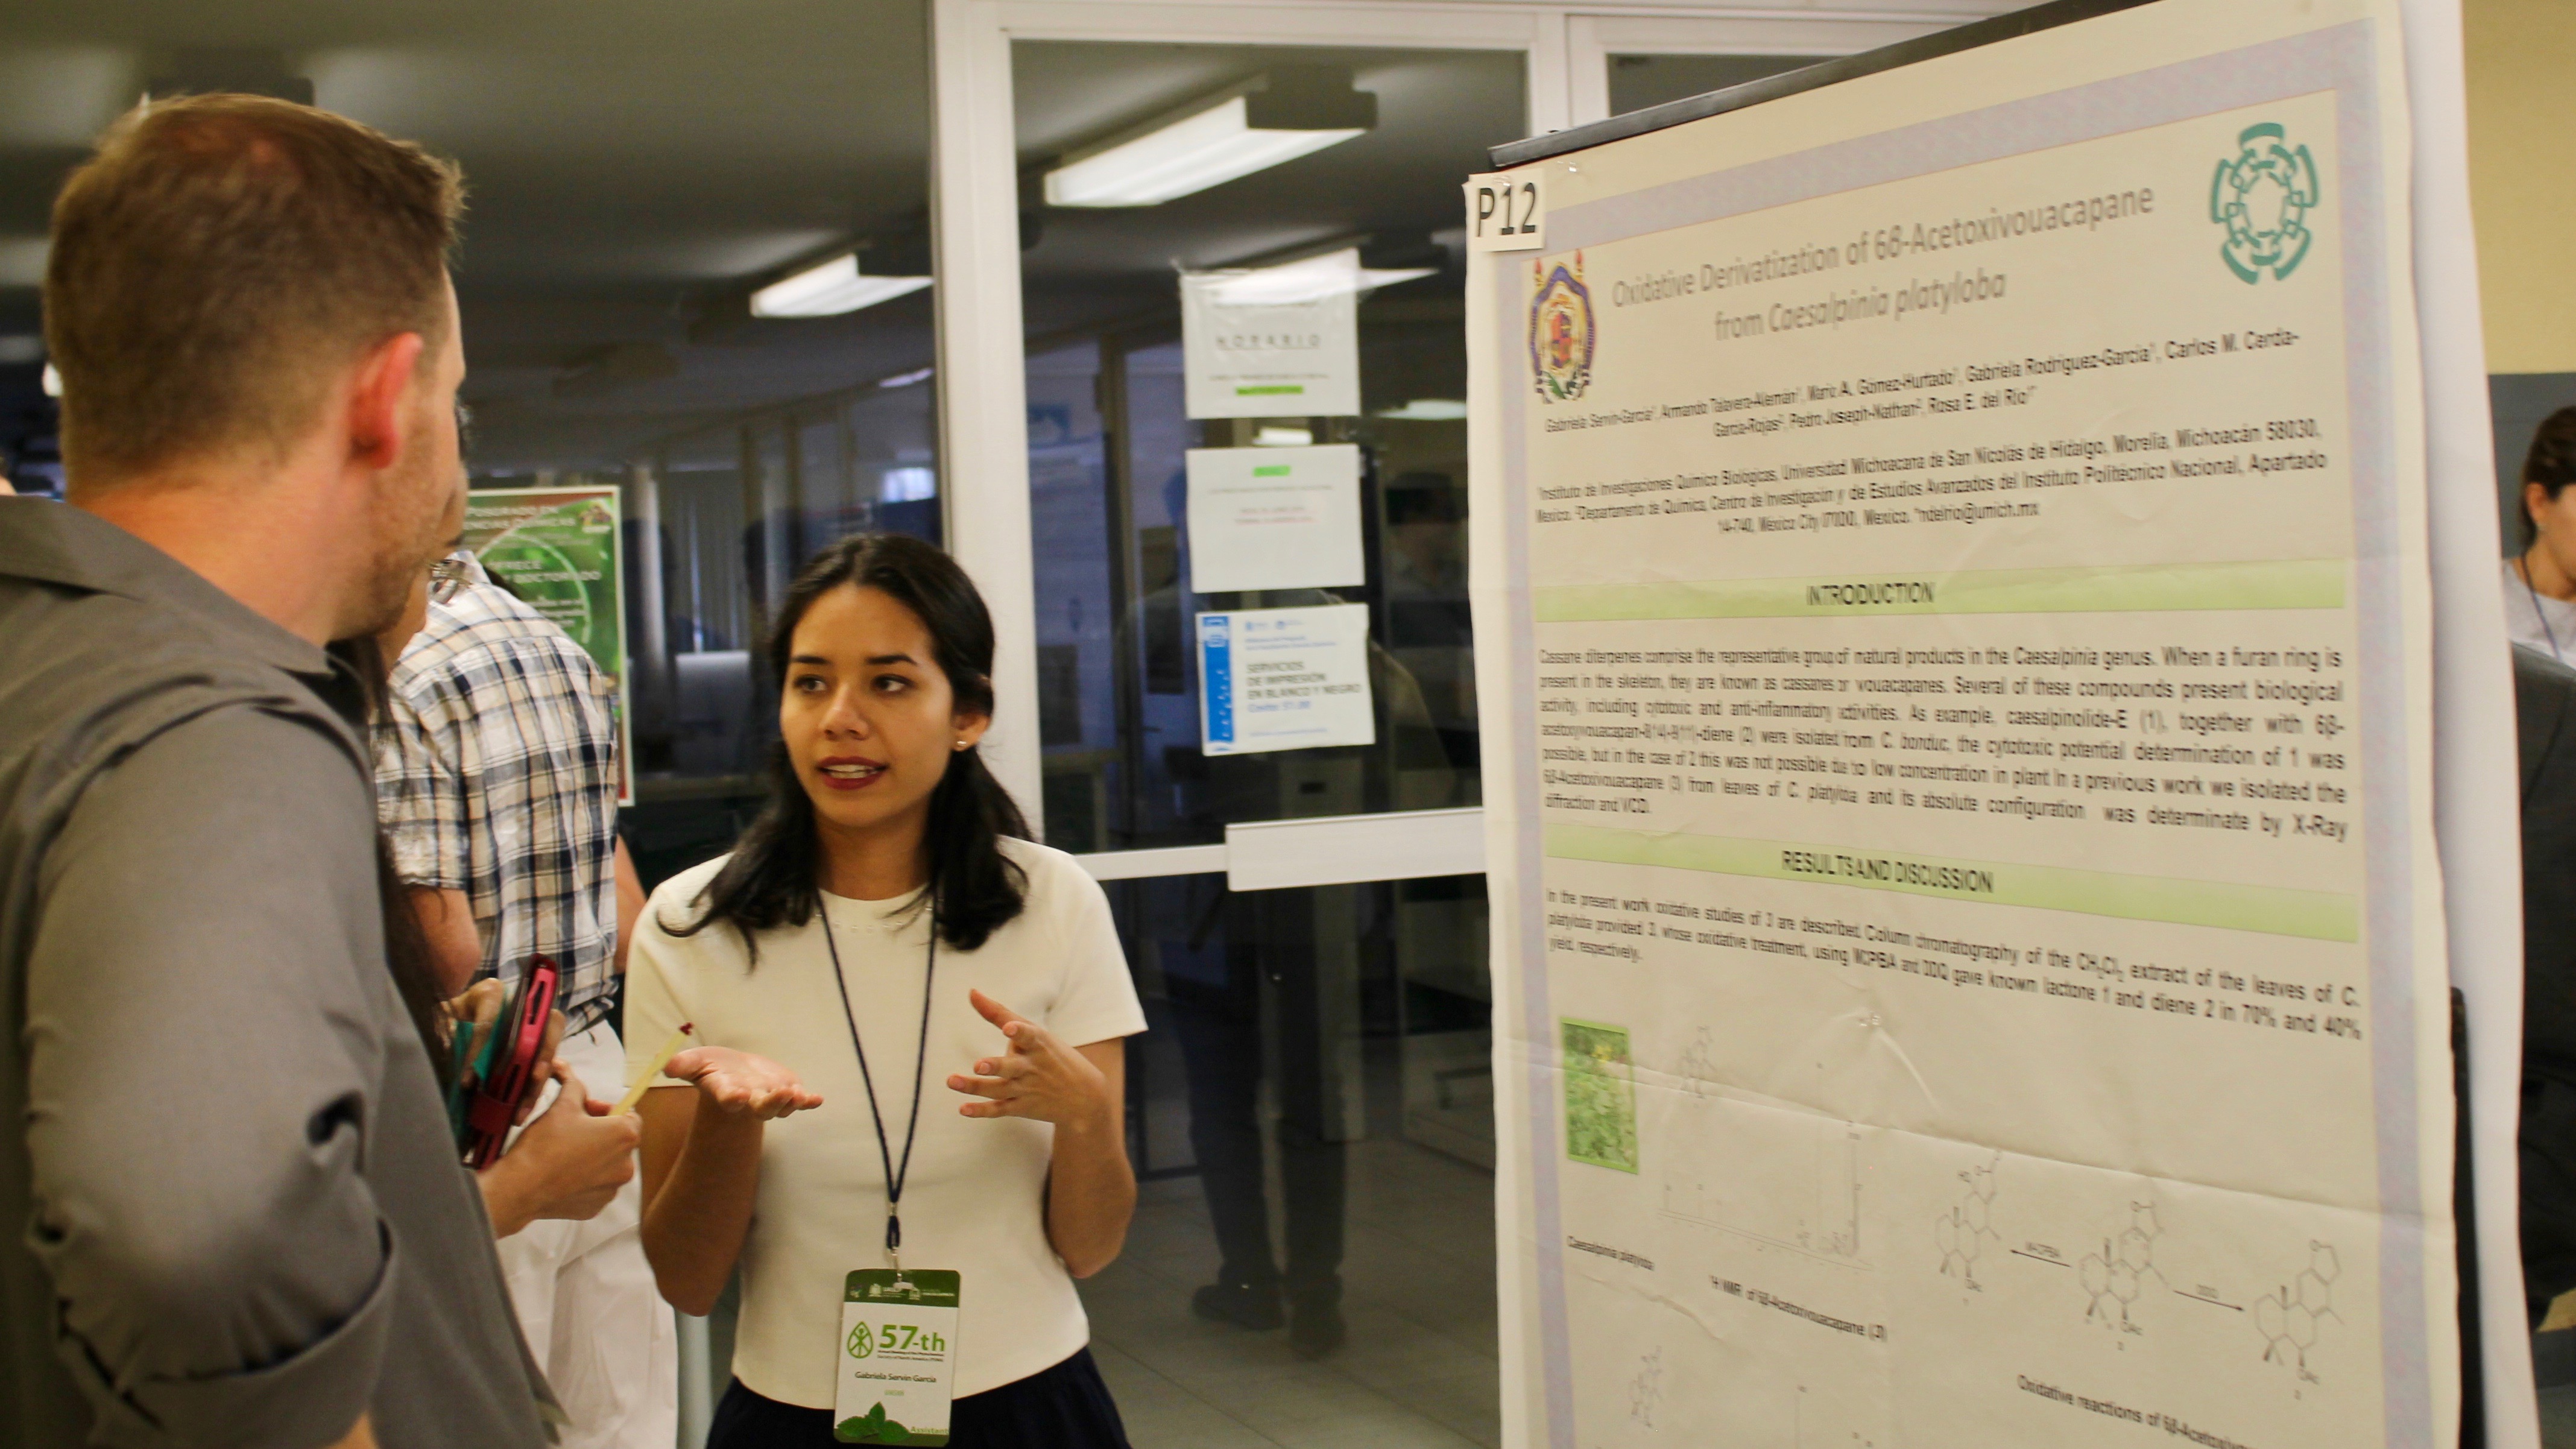 Zerbe at a poster session